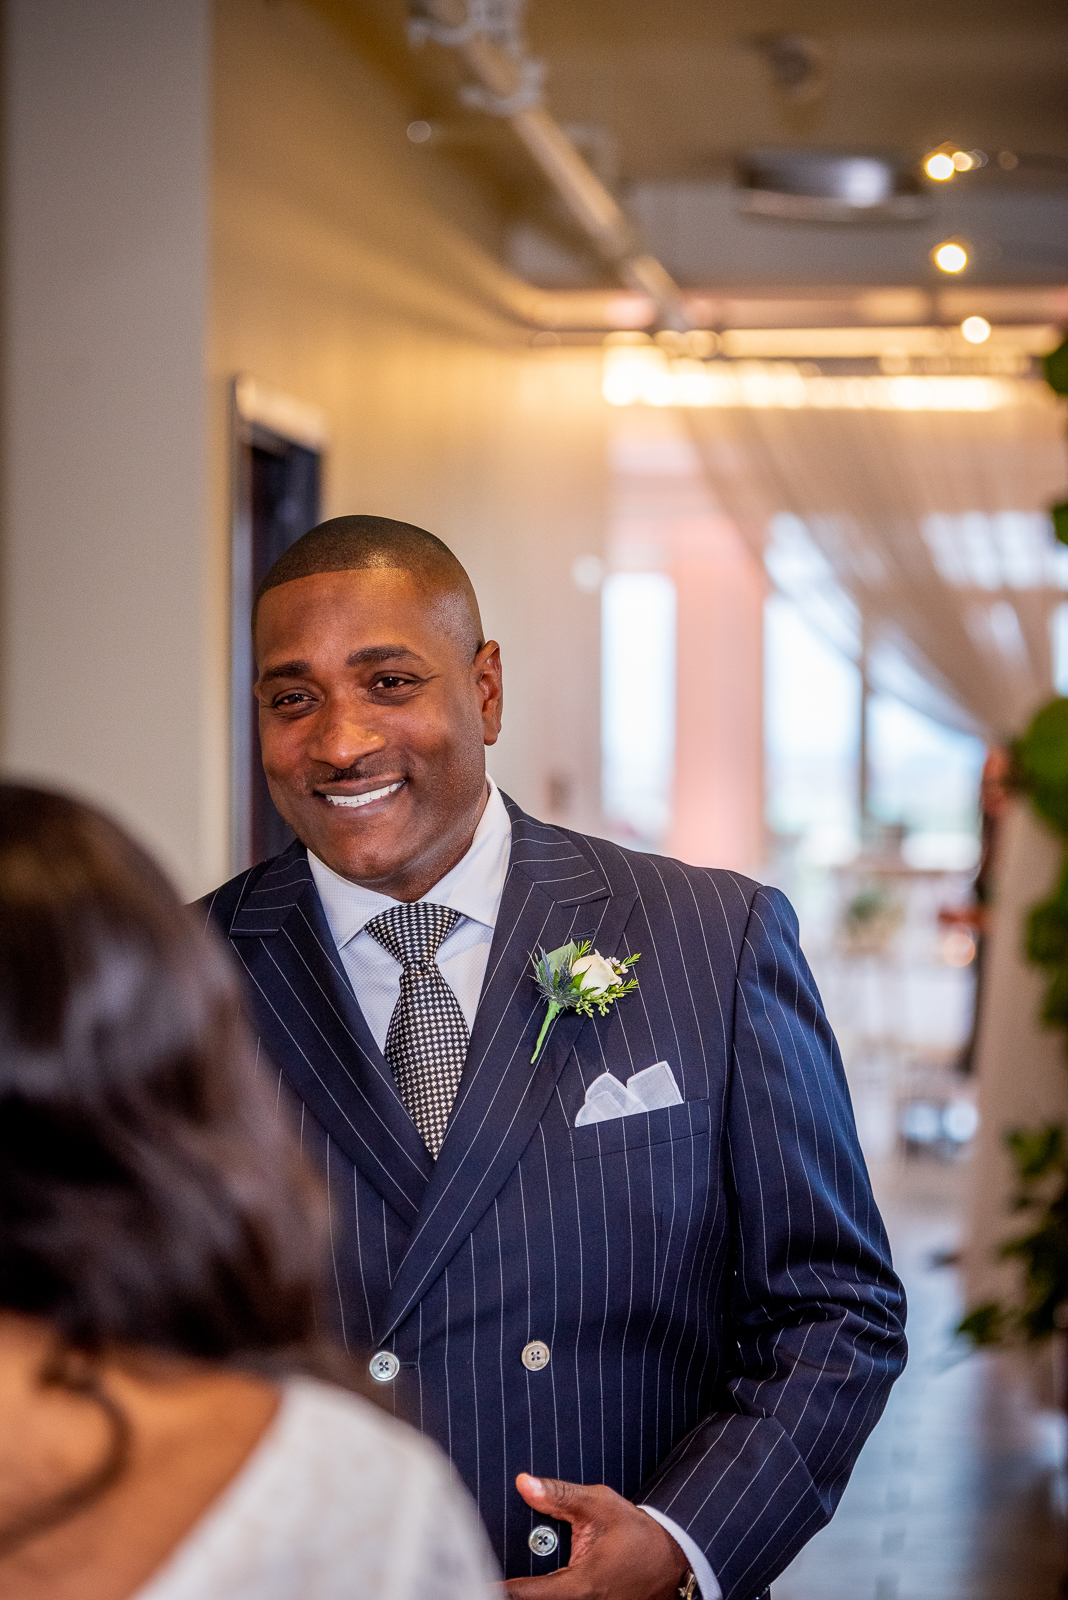 Bride with father, first look, smile, sweet, cute, pink light, pink uplighting, African American bride, African American wedding, urban wedding ceremony at Penthouse Events, Ohio City, Cleveland Flats